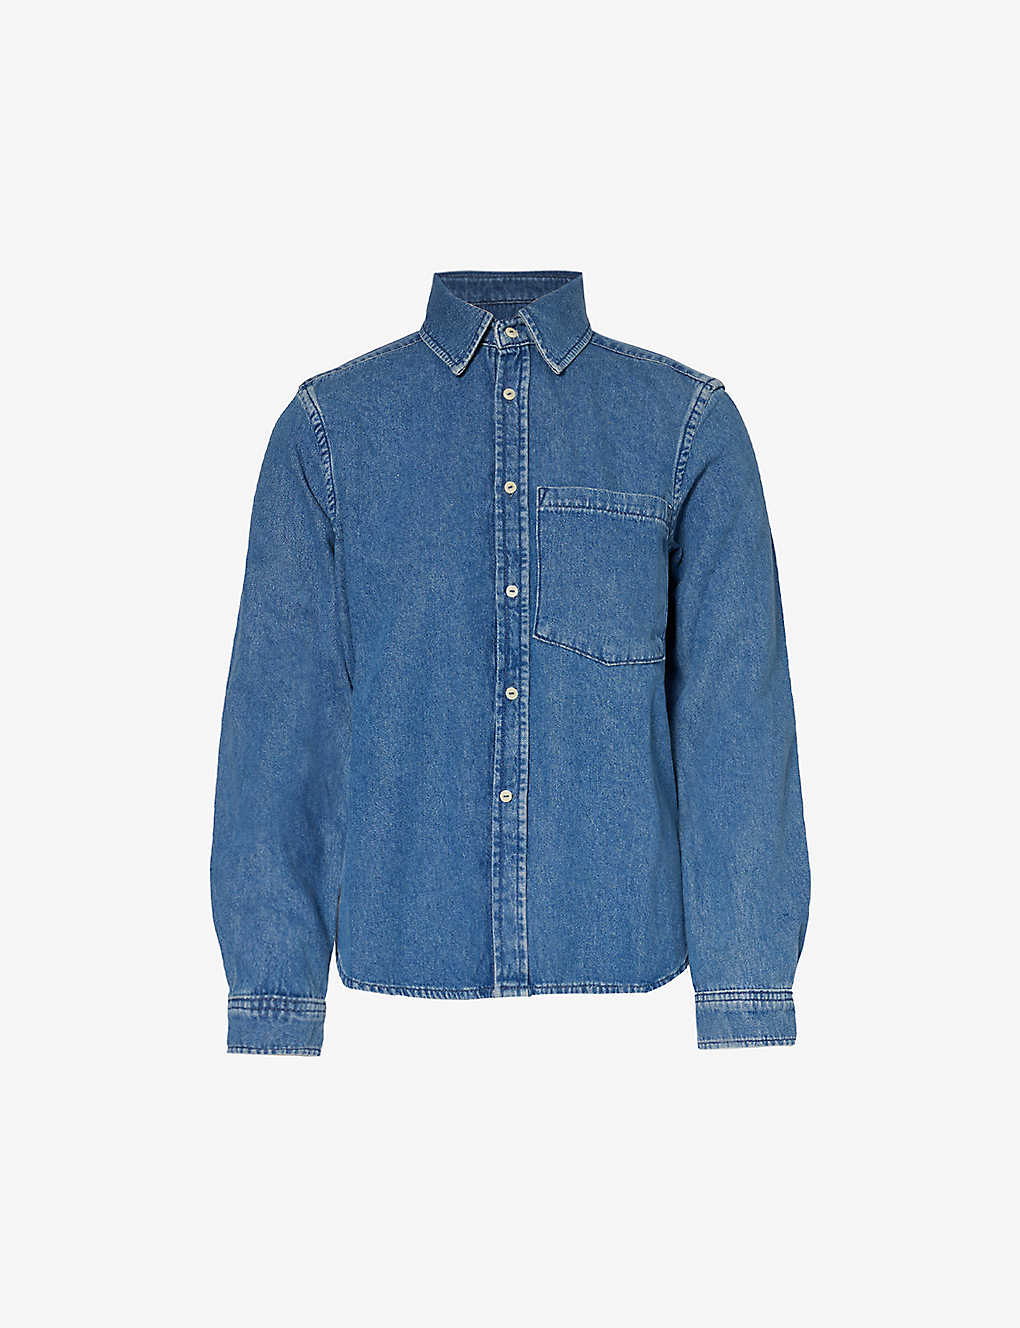 With Nothing Underneath Denim The Classic Shirt In Blue